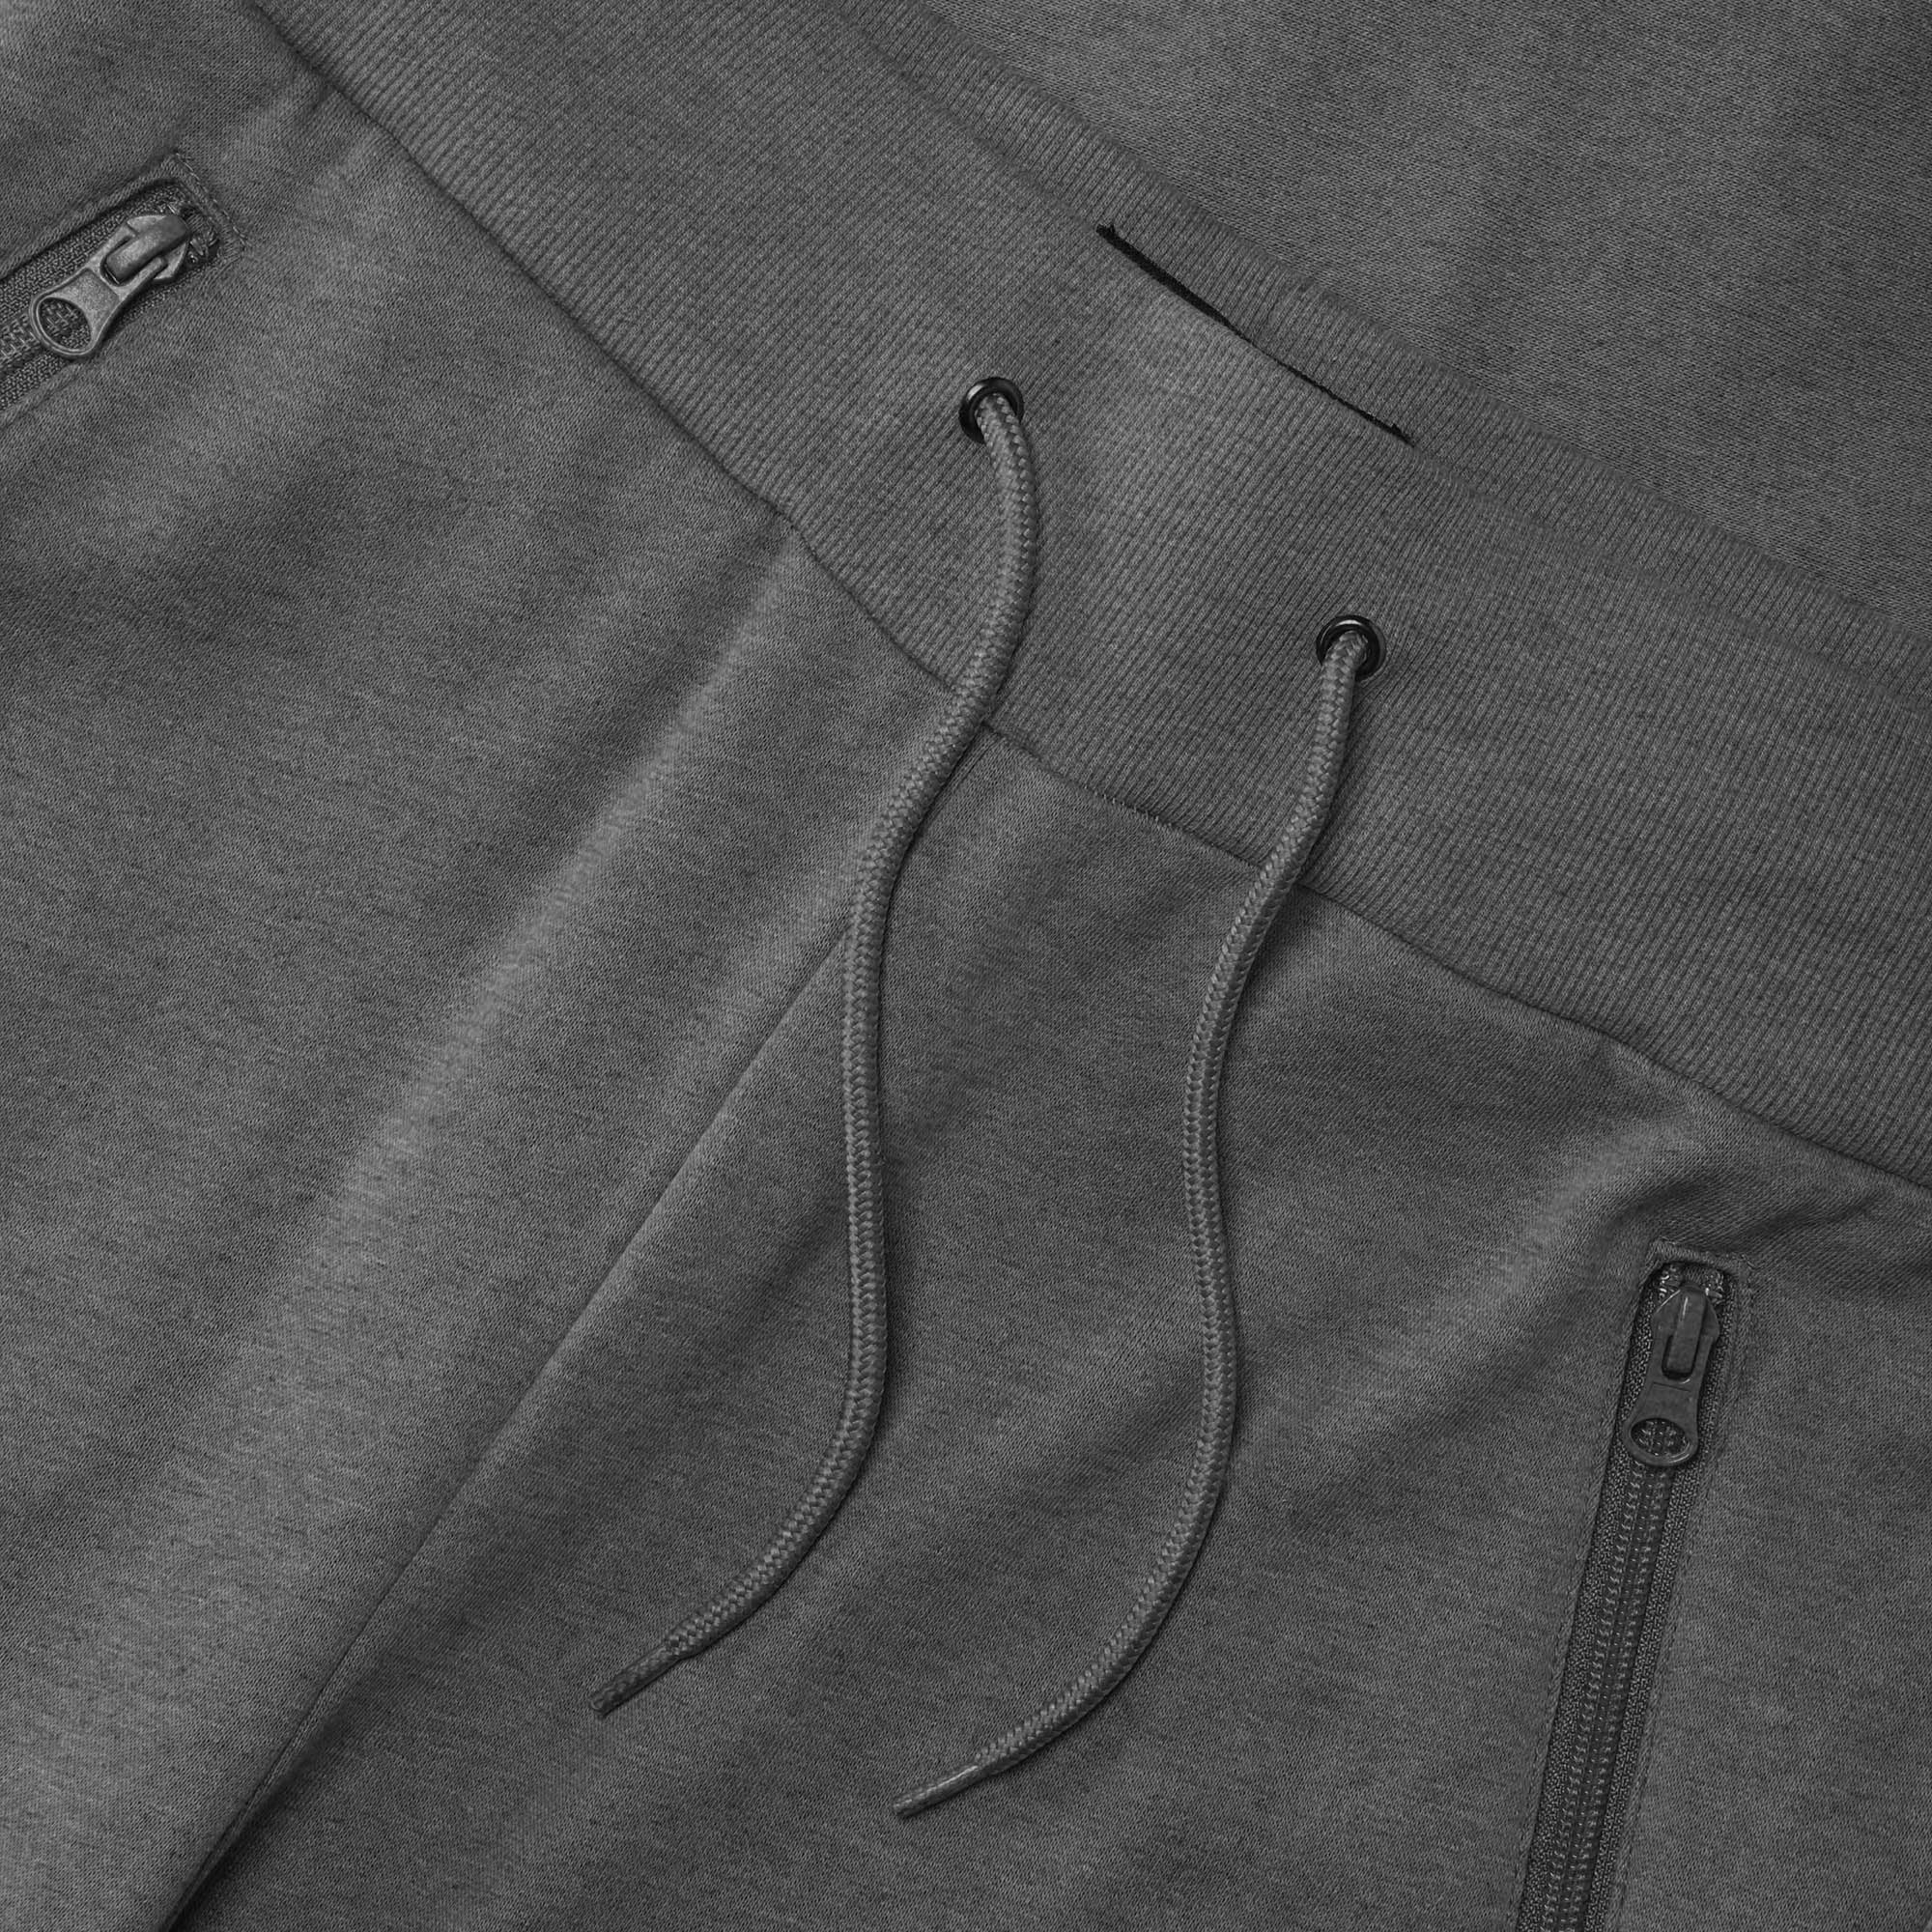 sweatpants with zipper pockets_sweatpants with zippers_men's sweatpants with zipper pockets_skinny jogger_mens skinny joggers_skinny sweatpants_boys skinny joggers_Heather Gray